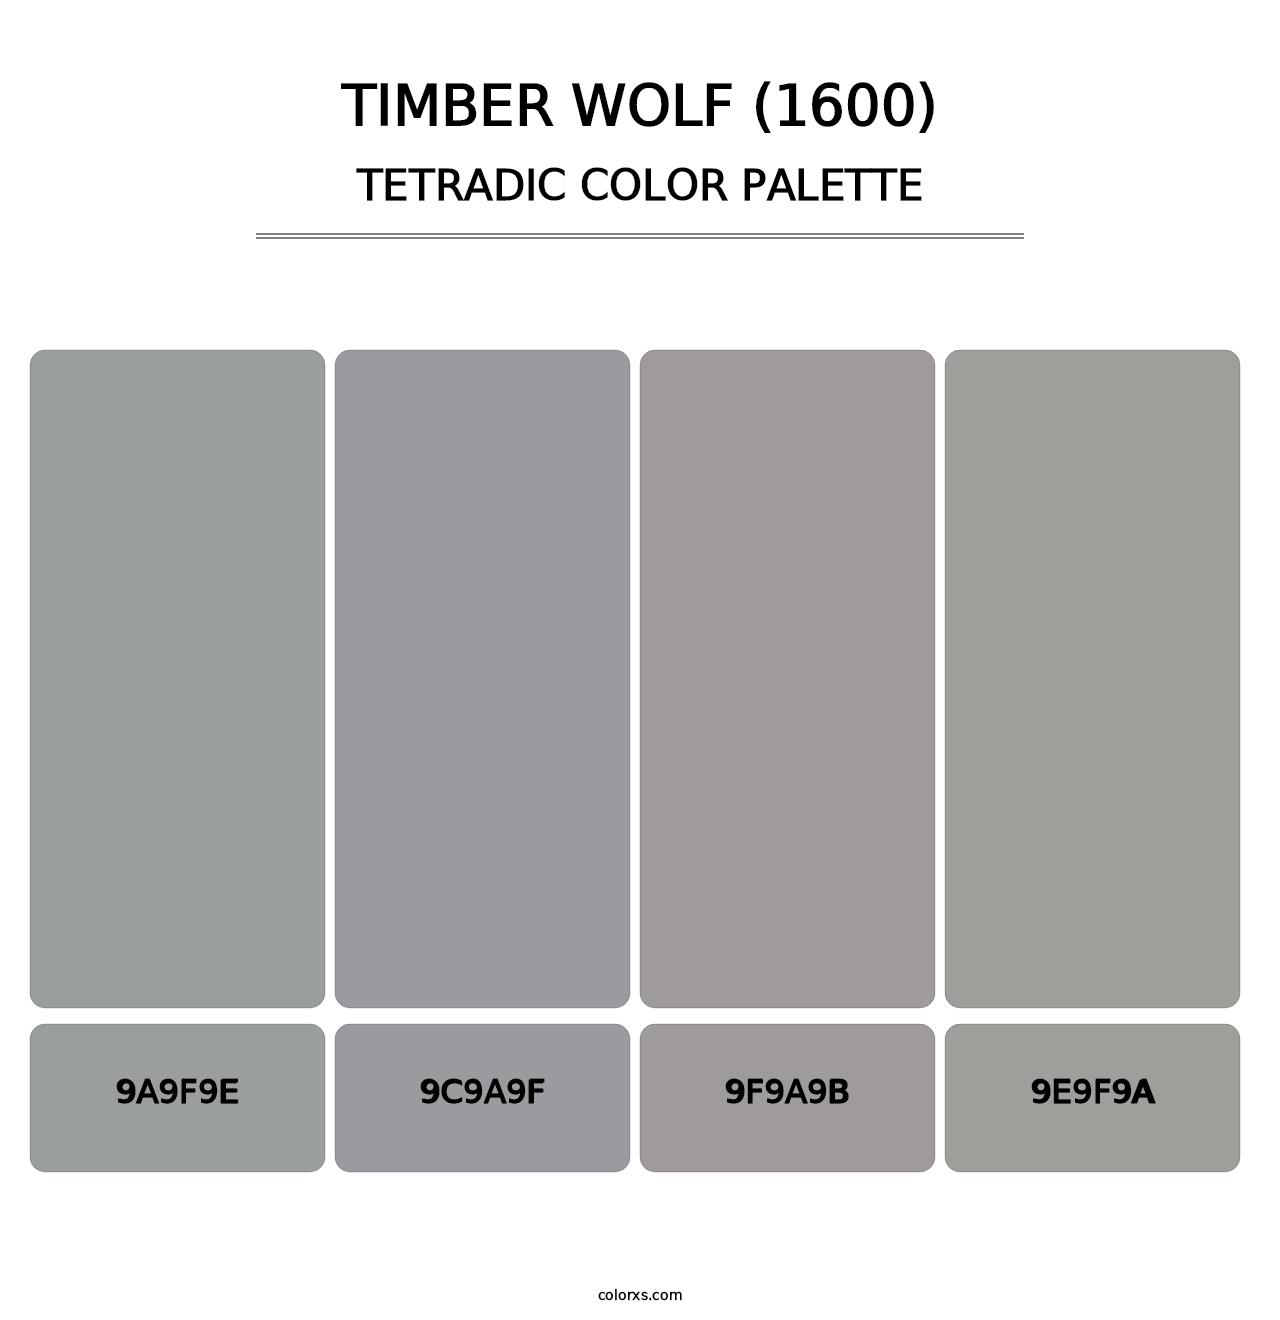 Timber Wolf (1600) - Tetradic Color Palette